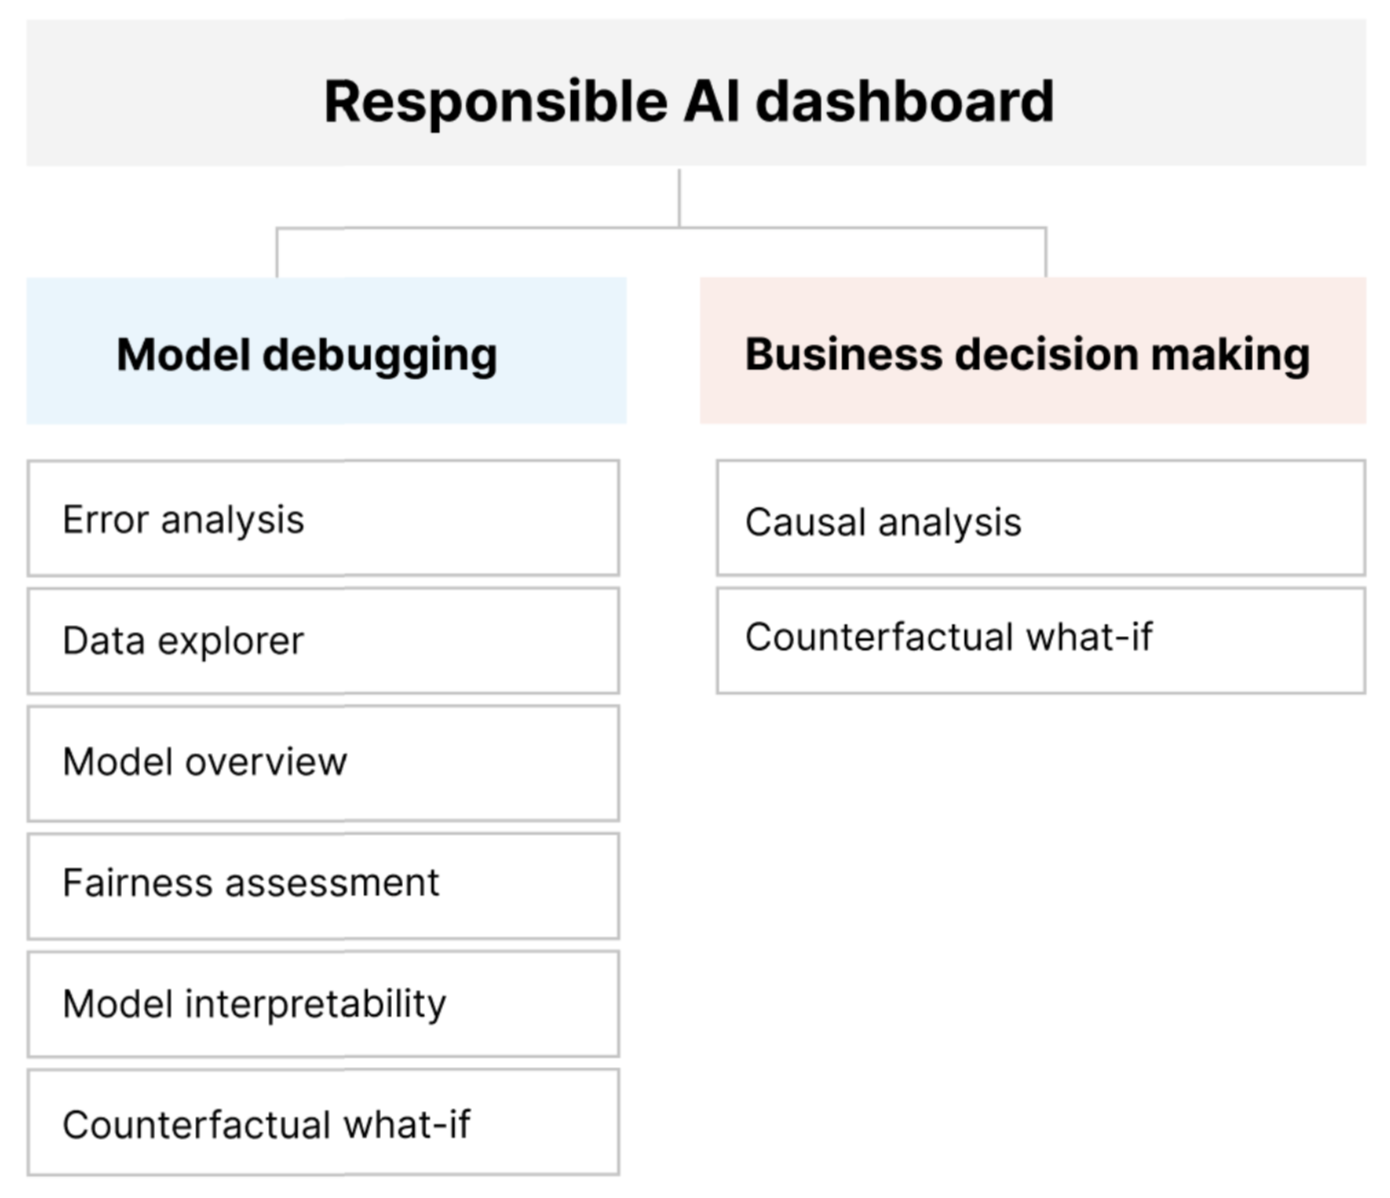  Diagram of Responsible A I dashboard components for model debugging and responsible decision making.